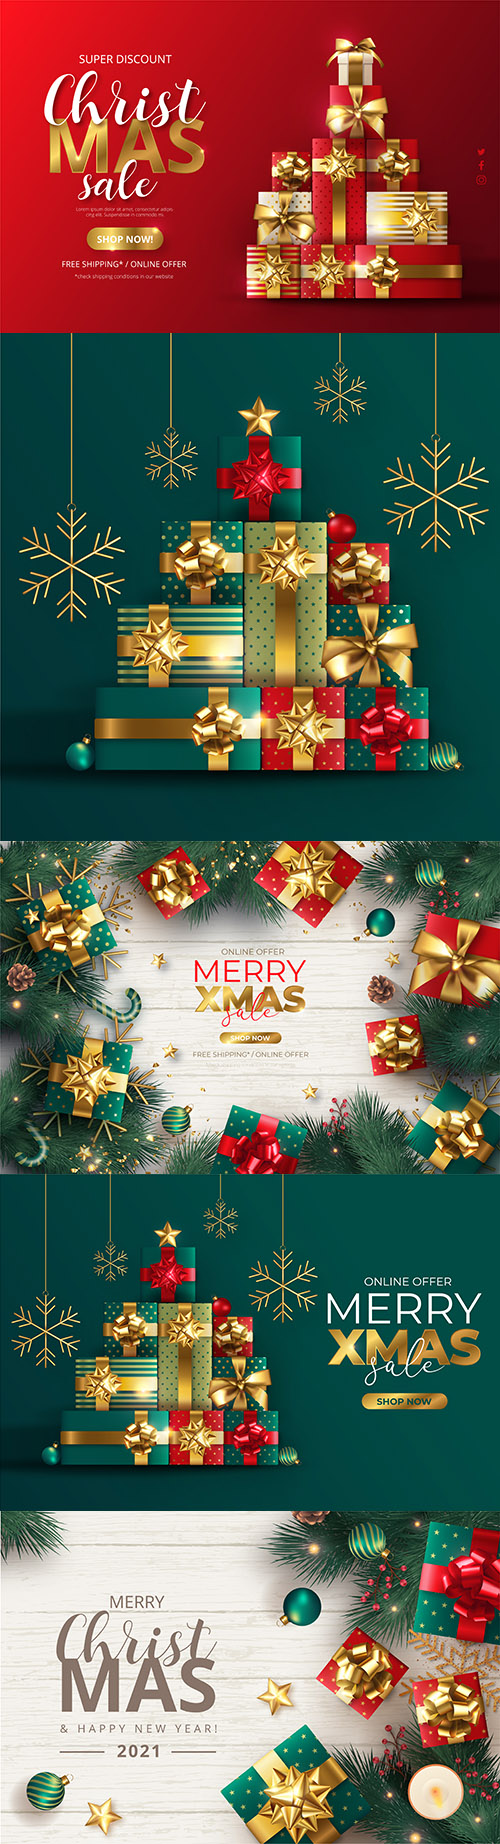 Realistic Christmas sale background with Christmas tree from gifts
